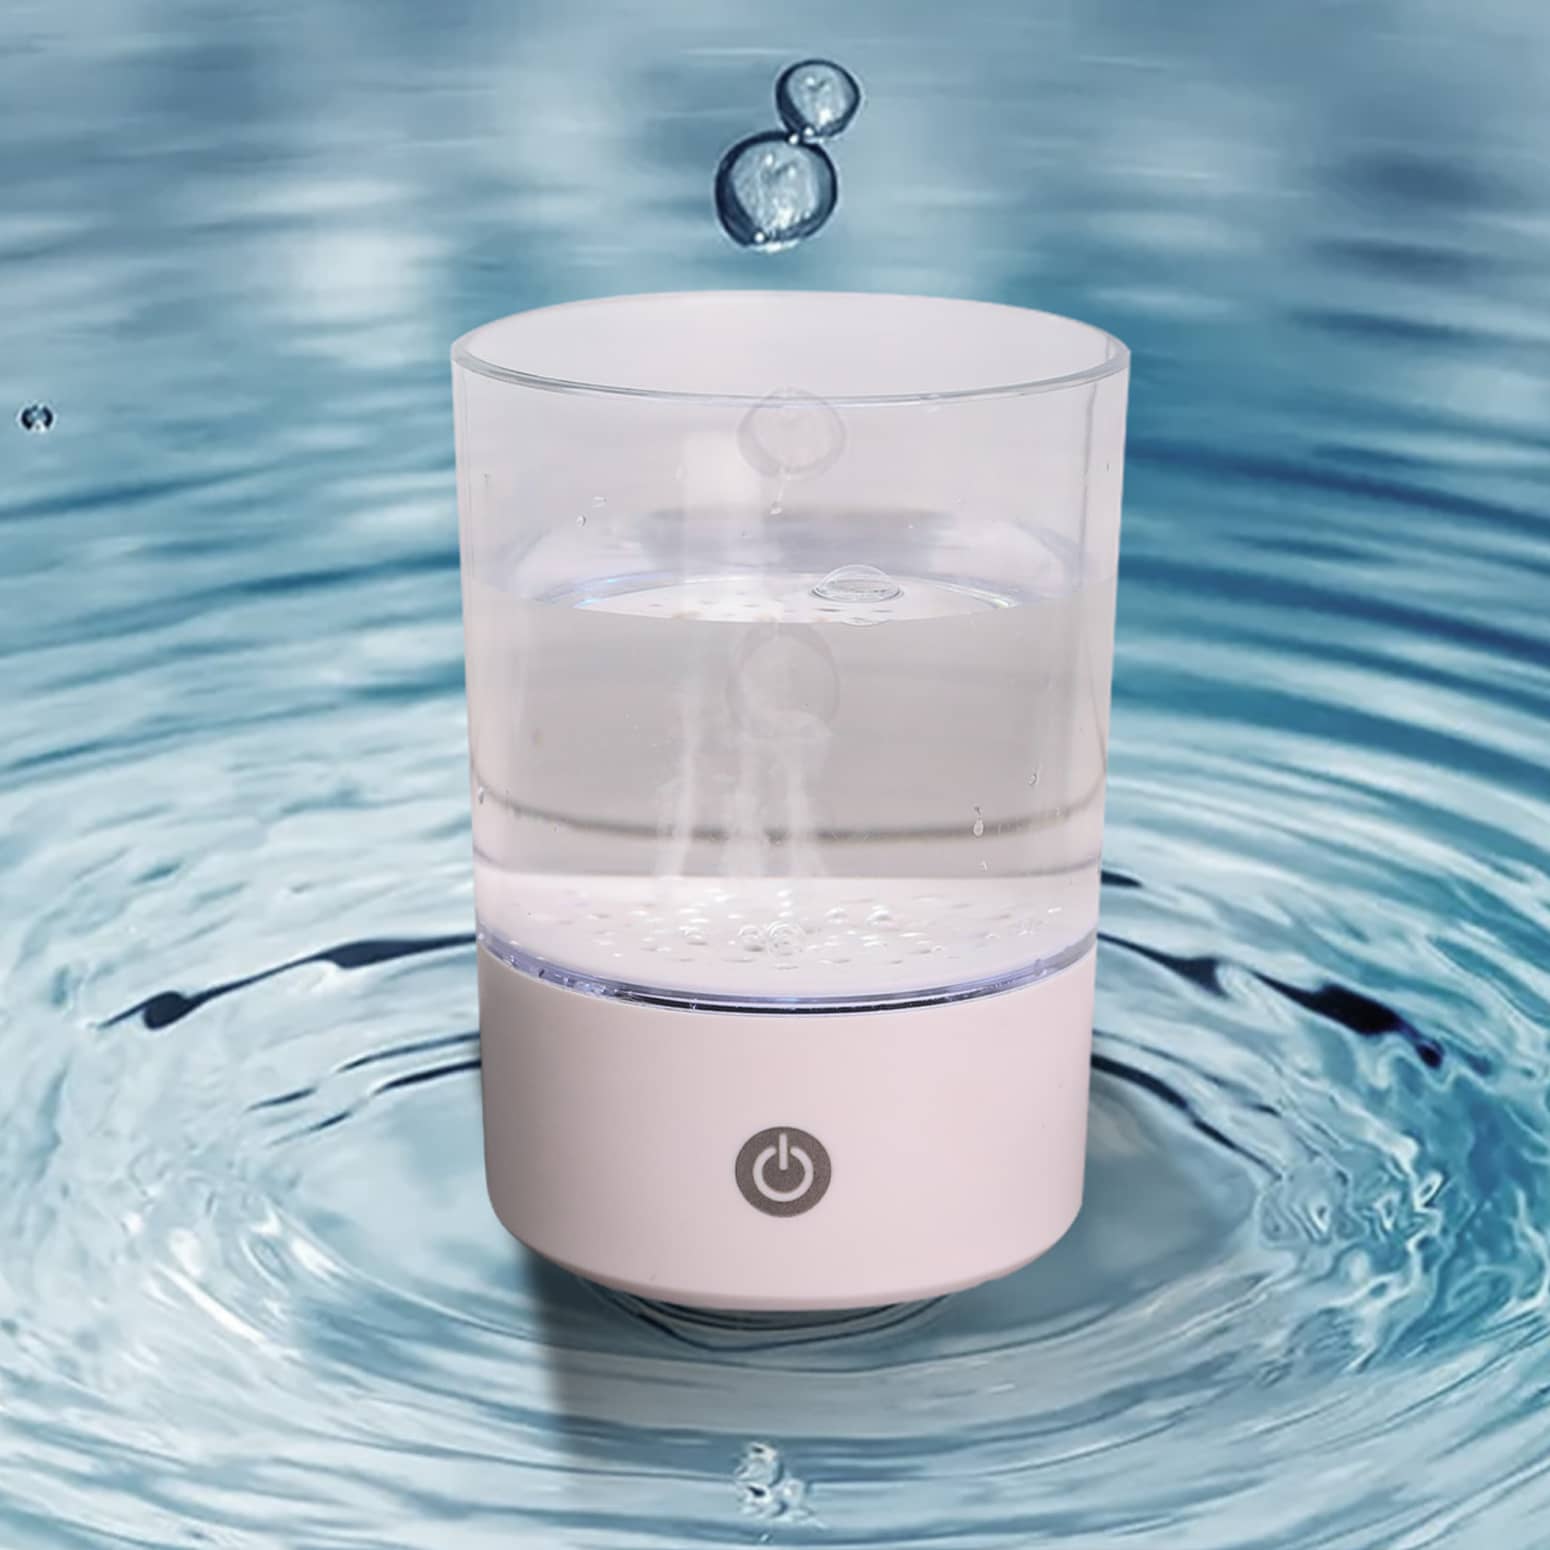 Electrolyzed Water Cup - Turns Tap Water Into Disinfecting Mouthwash!